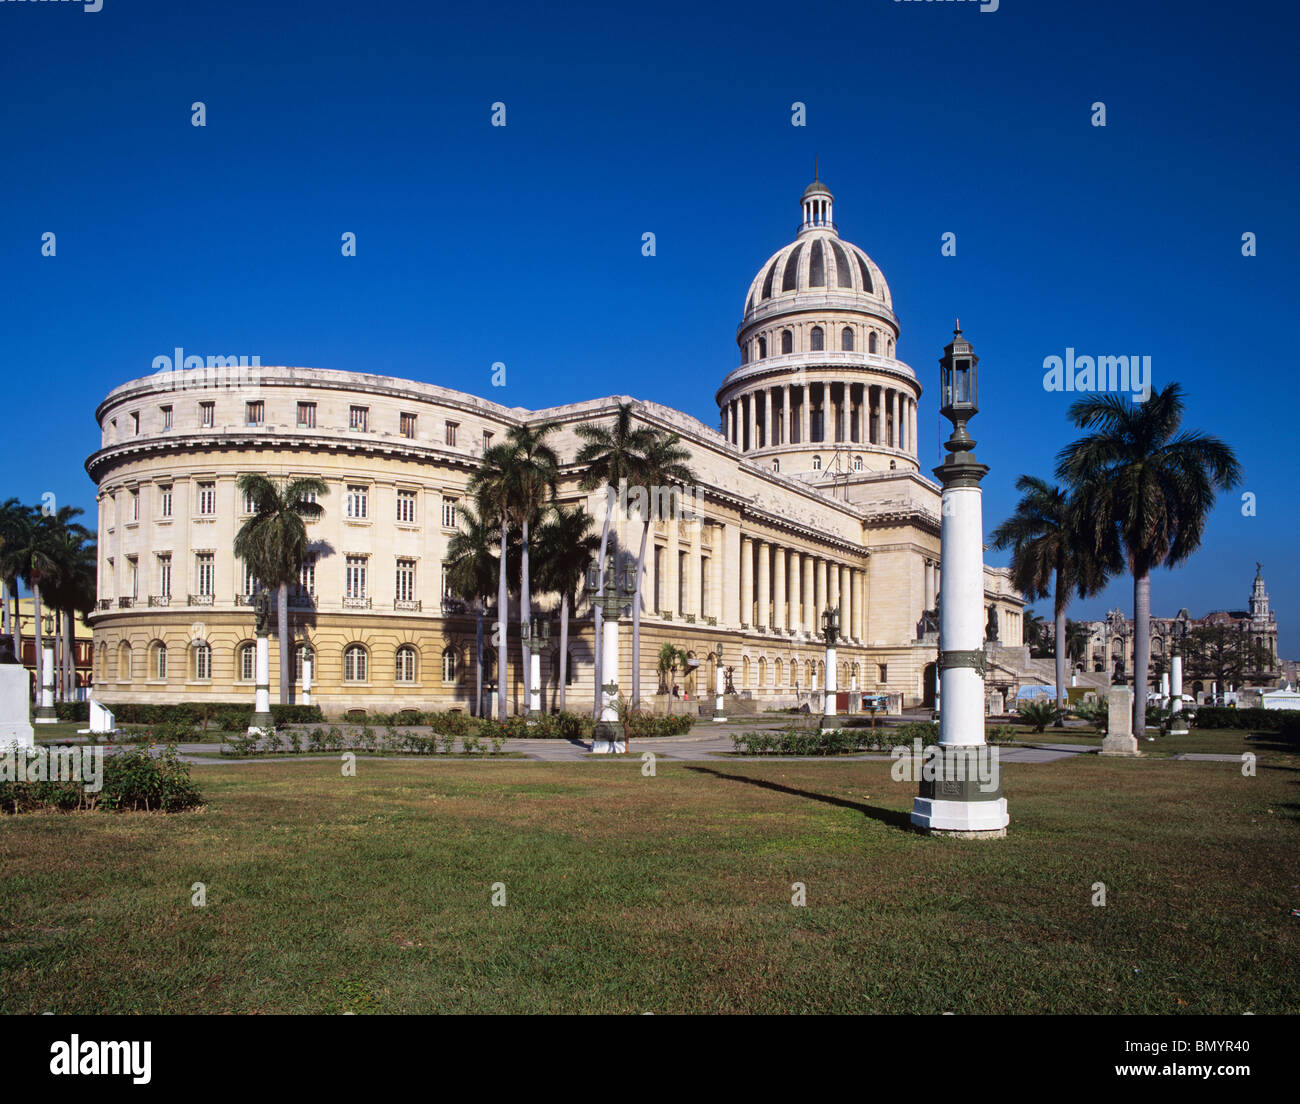 Collection 104+ Images when did havana become the capital of cuba Full HD, 2k, 4k